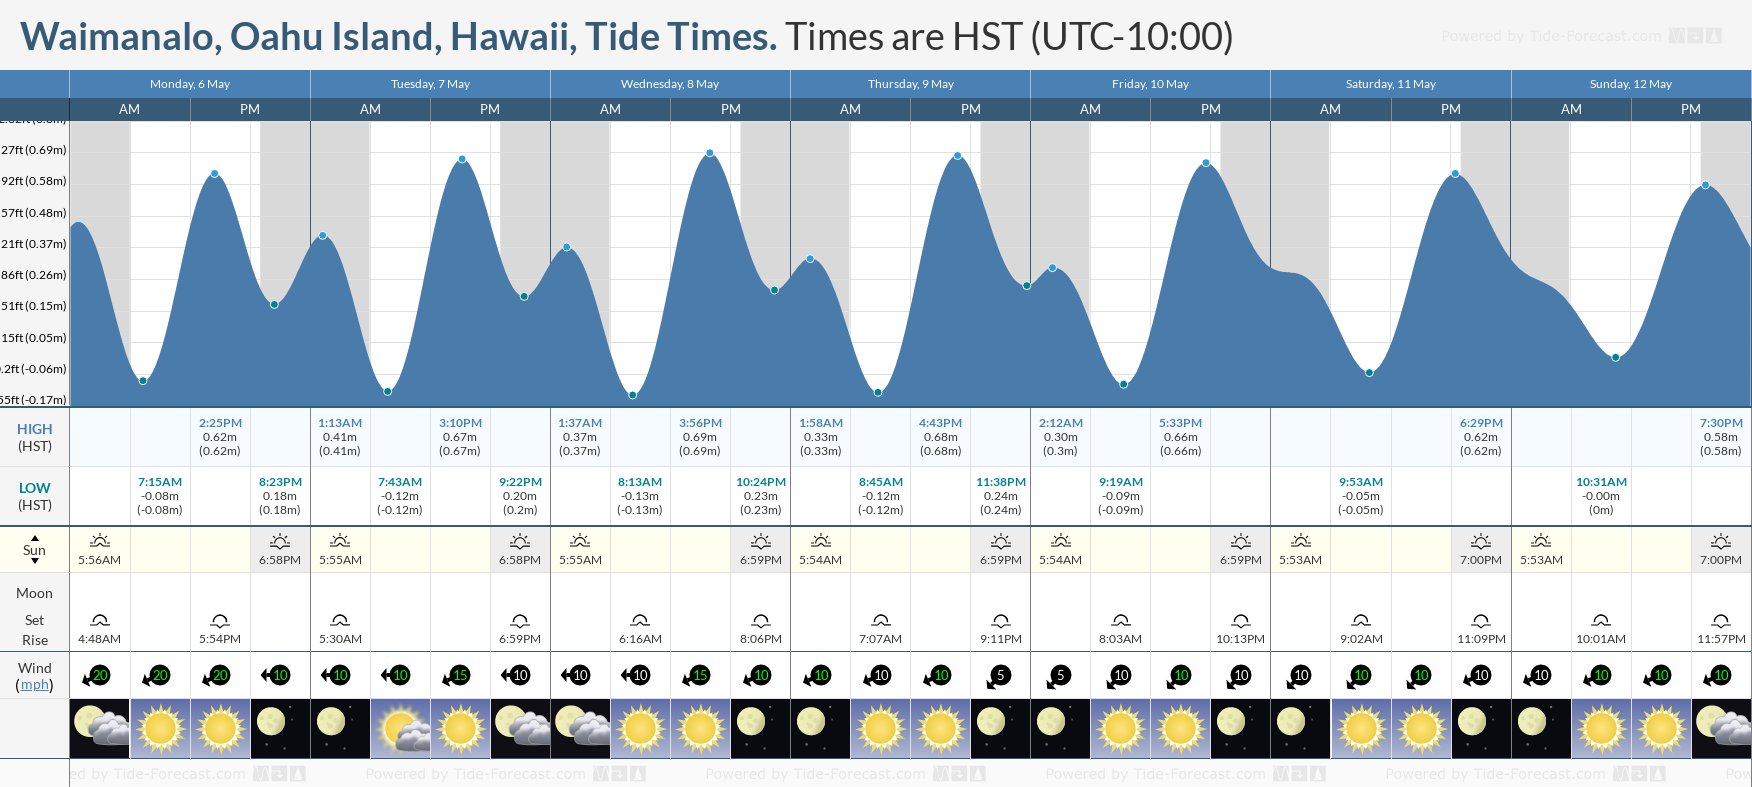 Waimanalo, Oahu Island, Hawaii Tide Chart including high and low tide tide times for the next 7 days